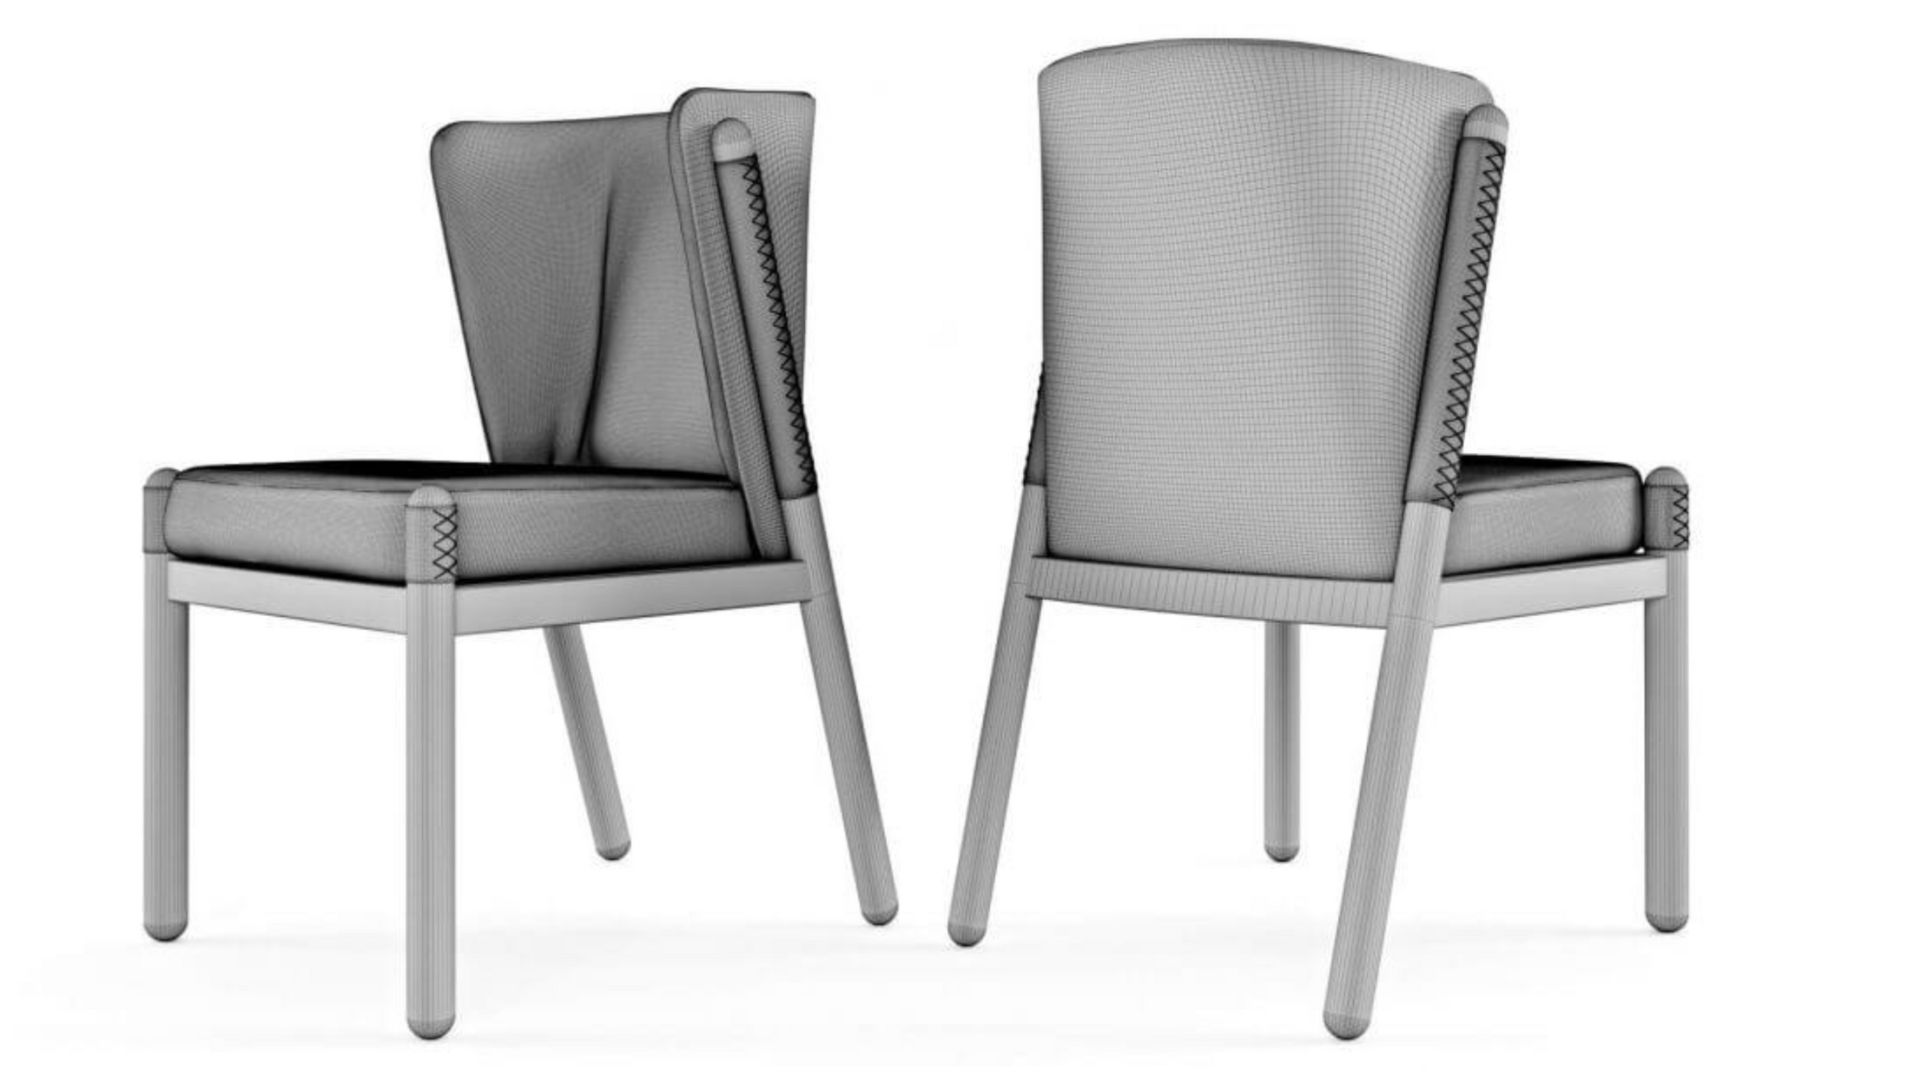 CAD Data Modelling of a Chair